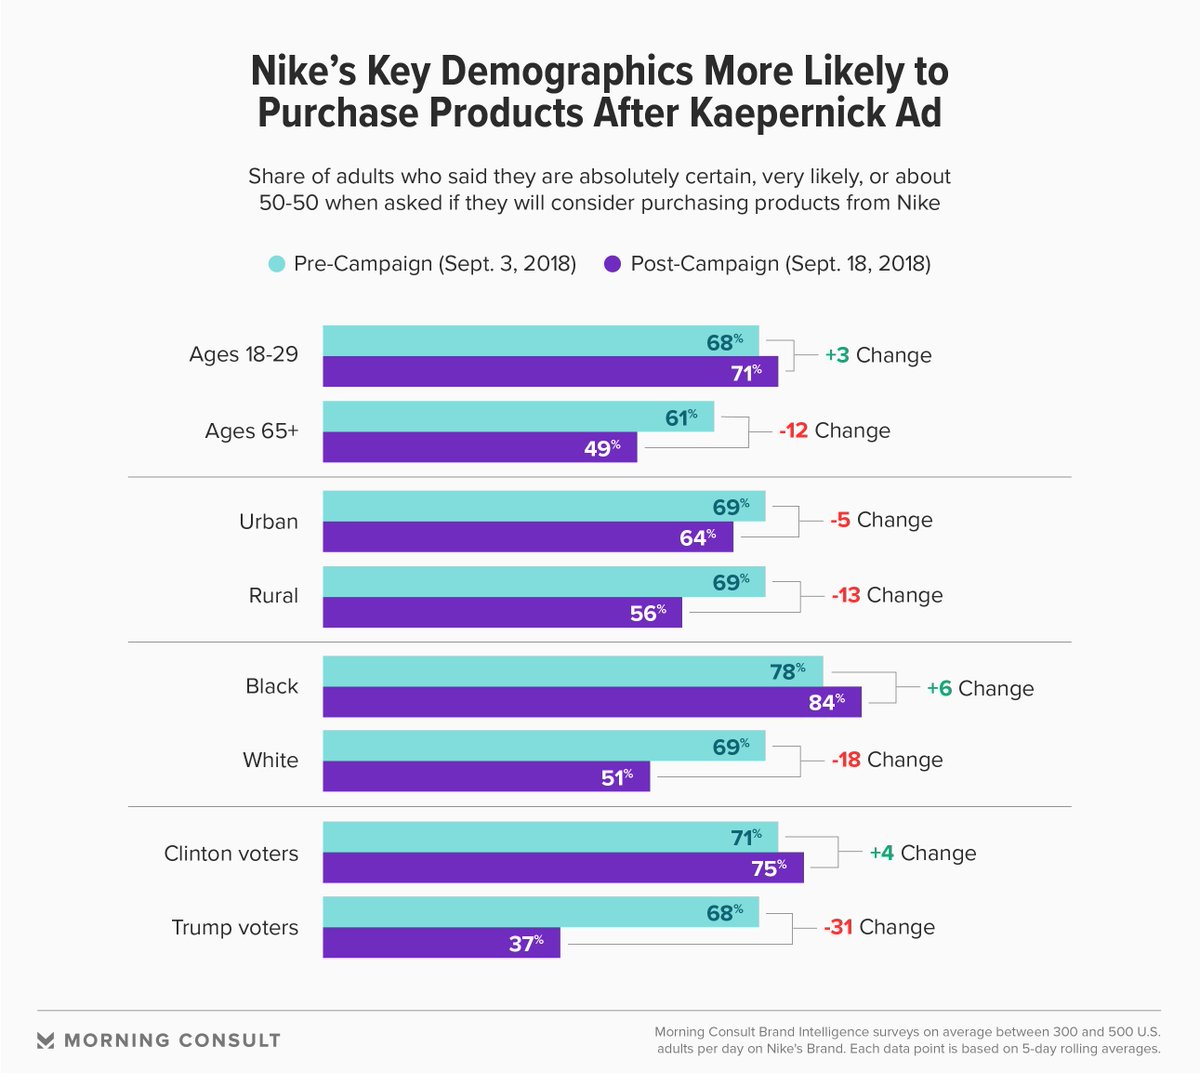 Vakantie Golven Matron Morning Consult on Twitter: "NEW: Nike brand tracking data reveals  purchasing consideration is on the rise among certain demographic groups:  https://t.co/Gv5nCUAxyN https://t.co/8R5fz6cfIg" / Twitter